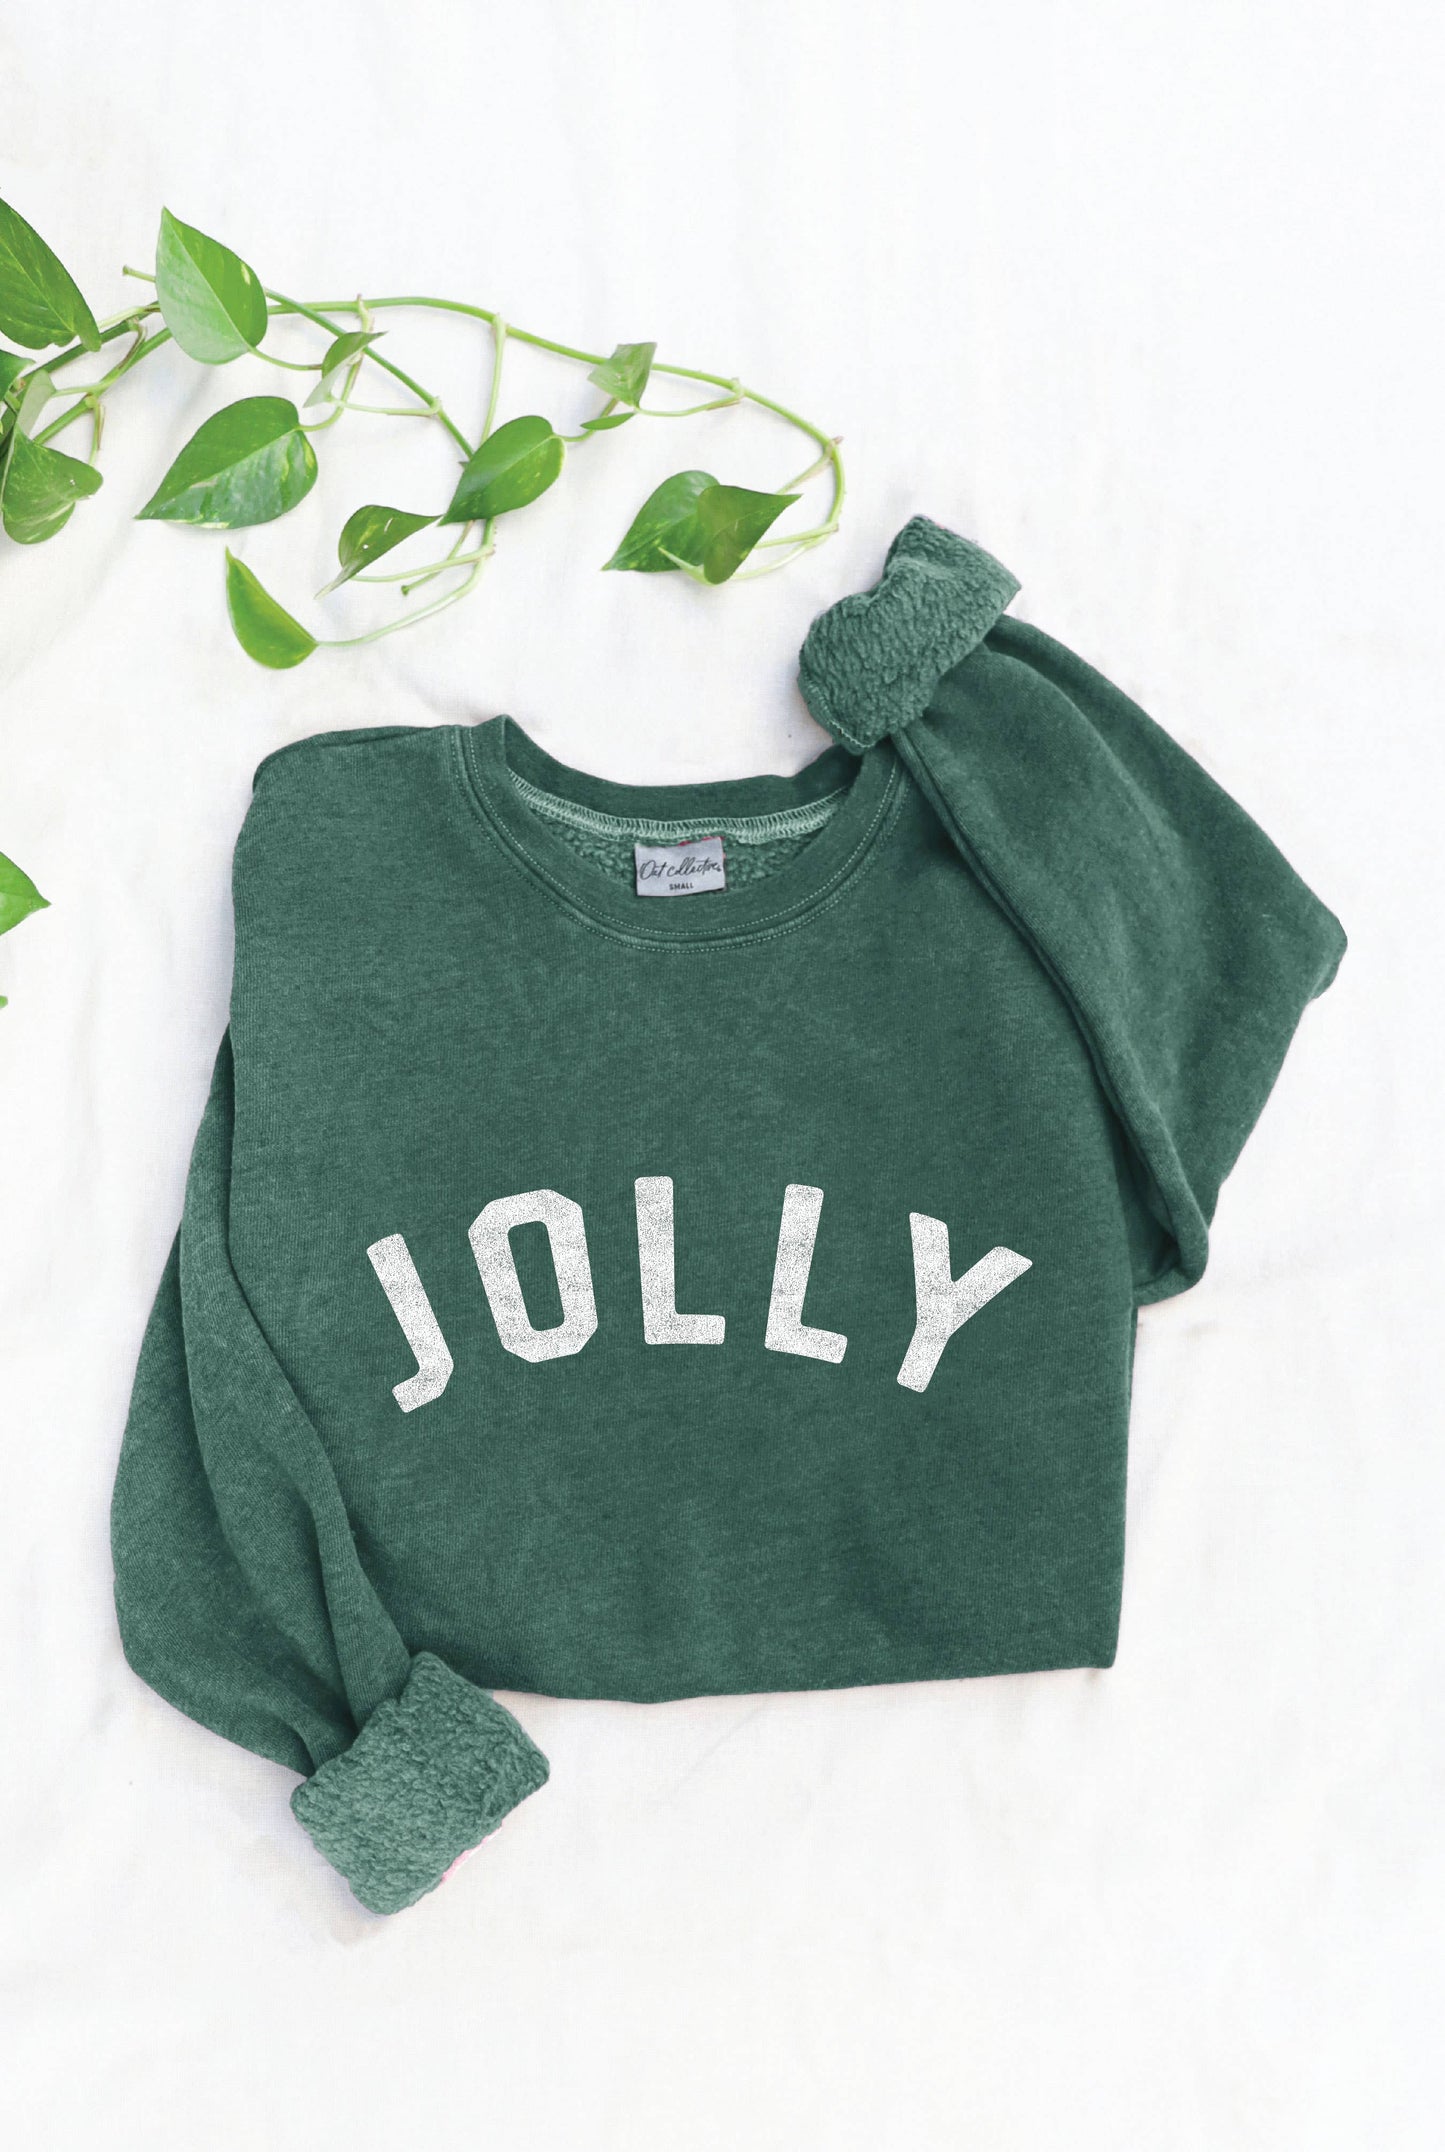 JOLLY  Mineral Washed Graphic Sweatshirt